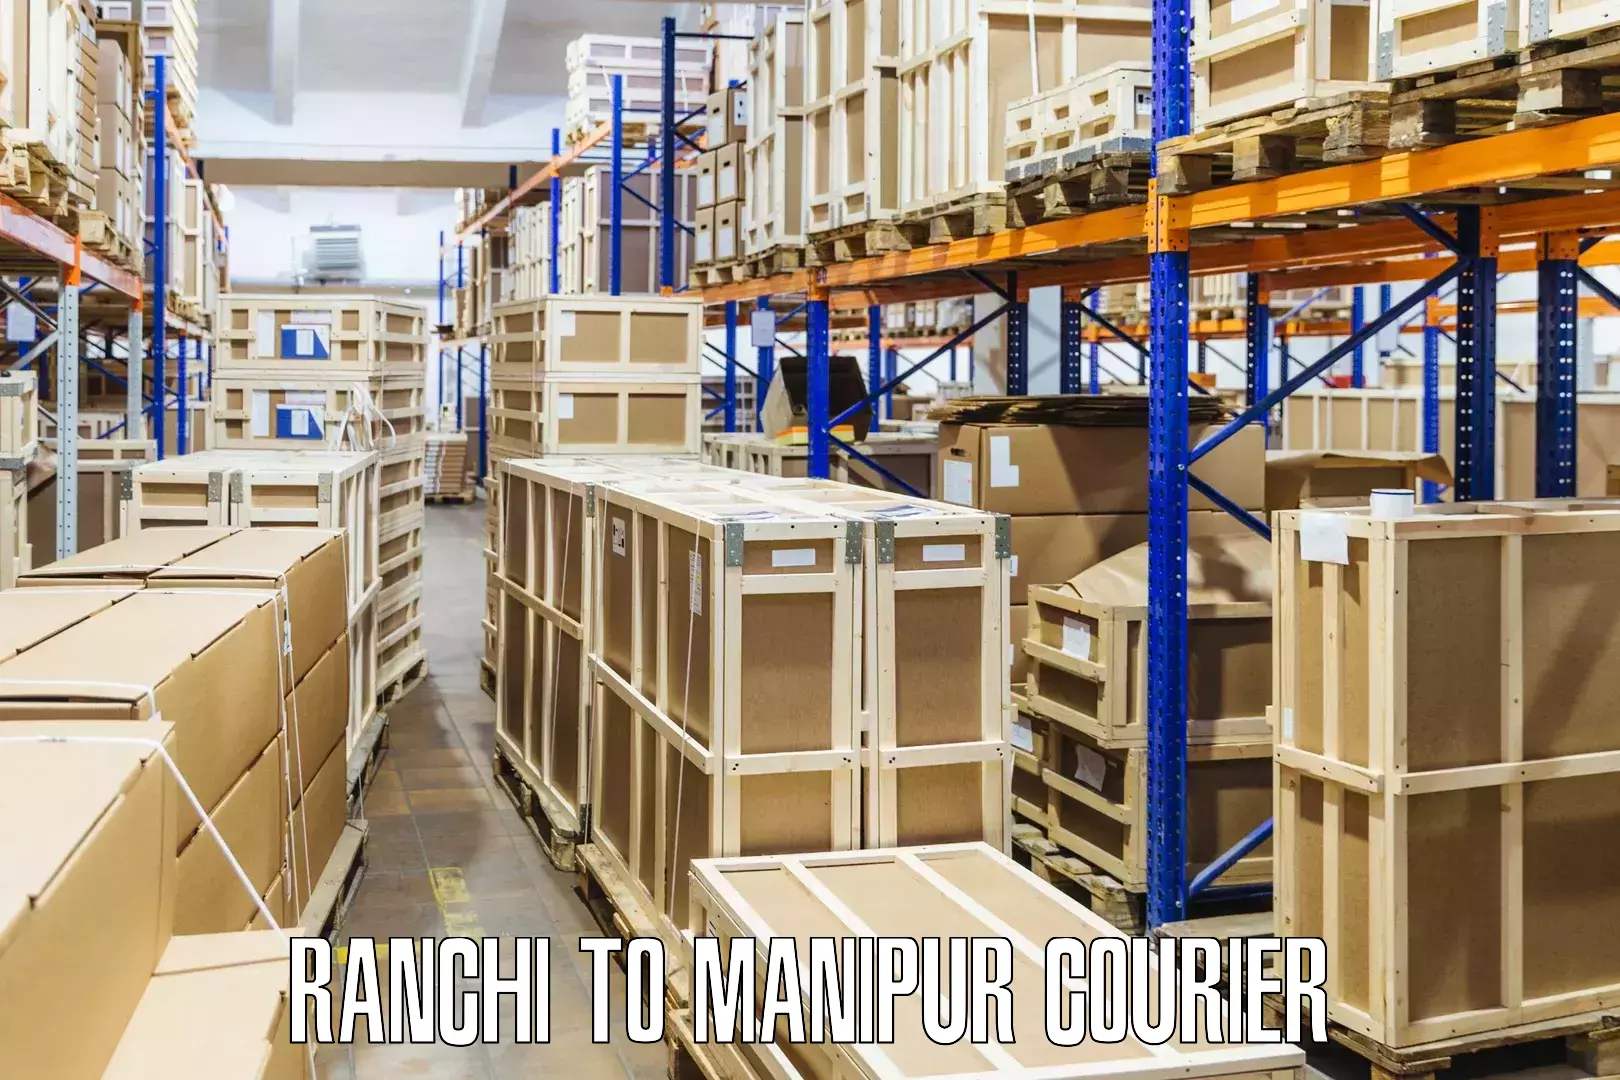 Comprehensive shipping network Ranchi to Chandel